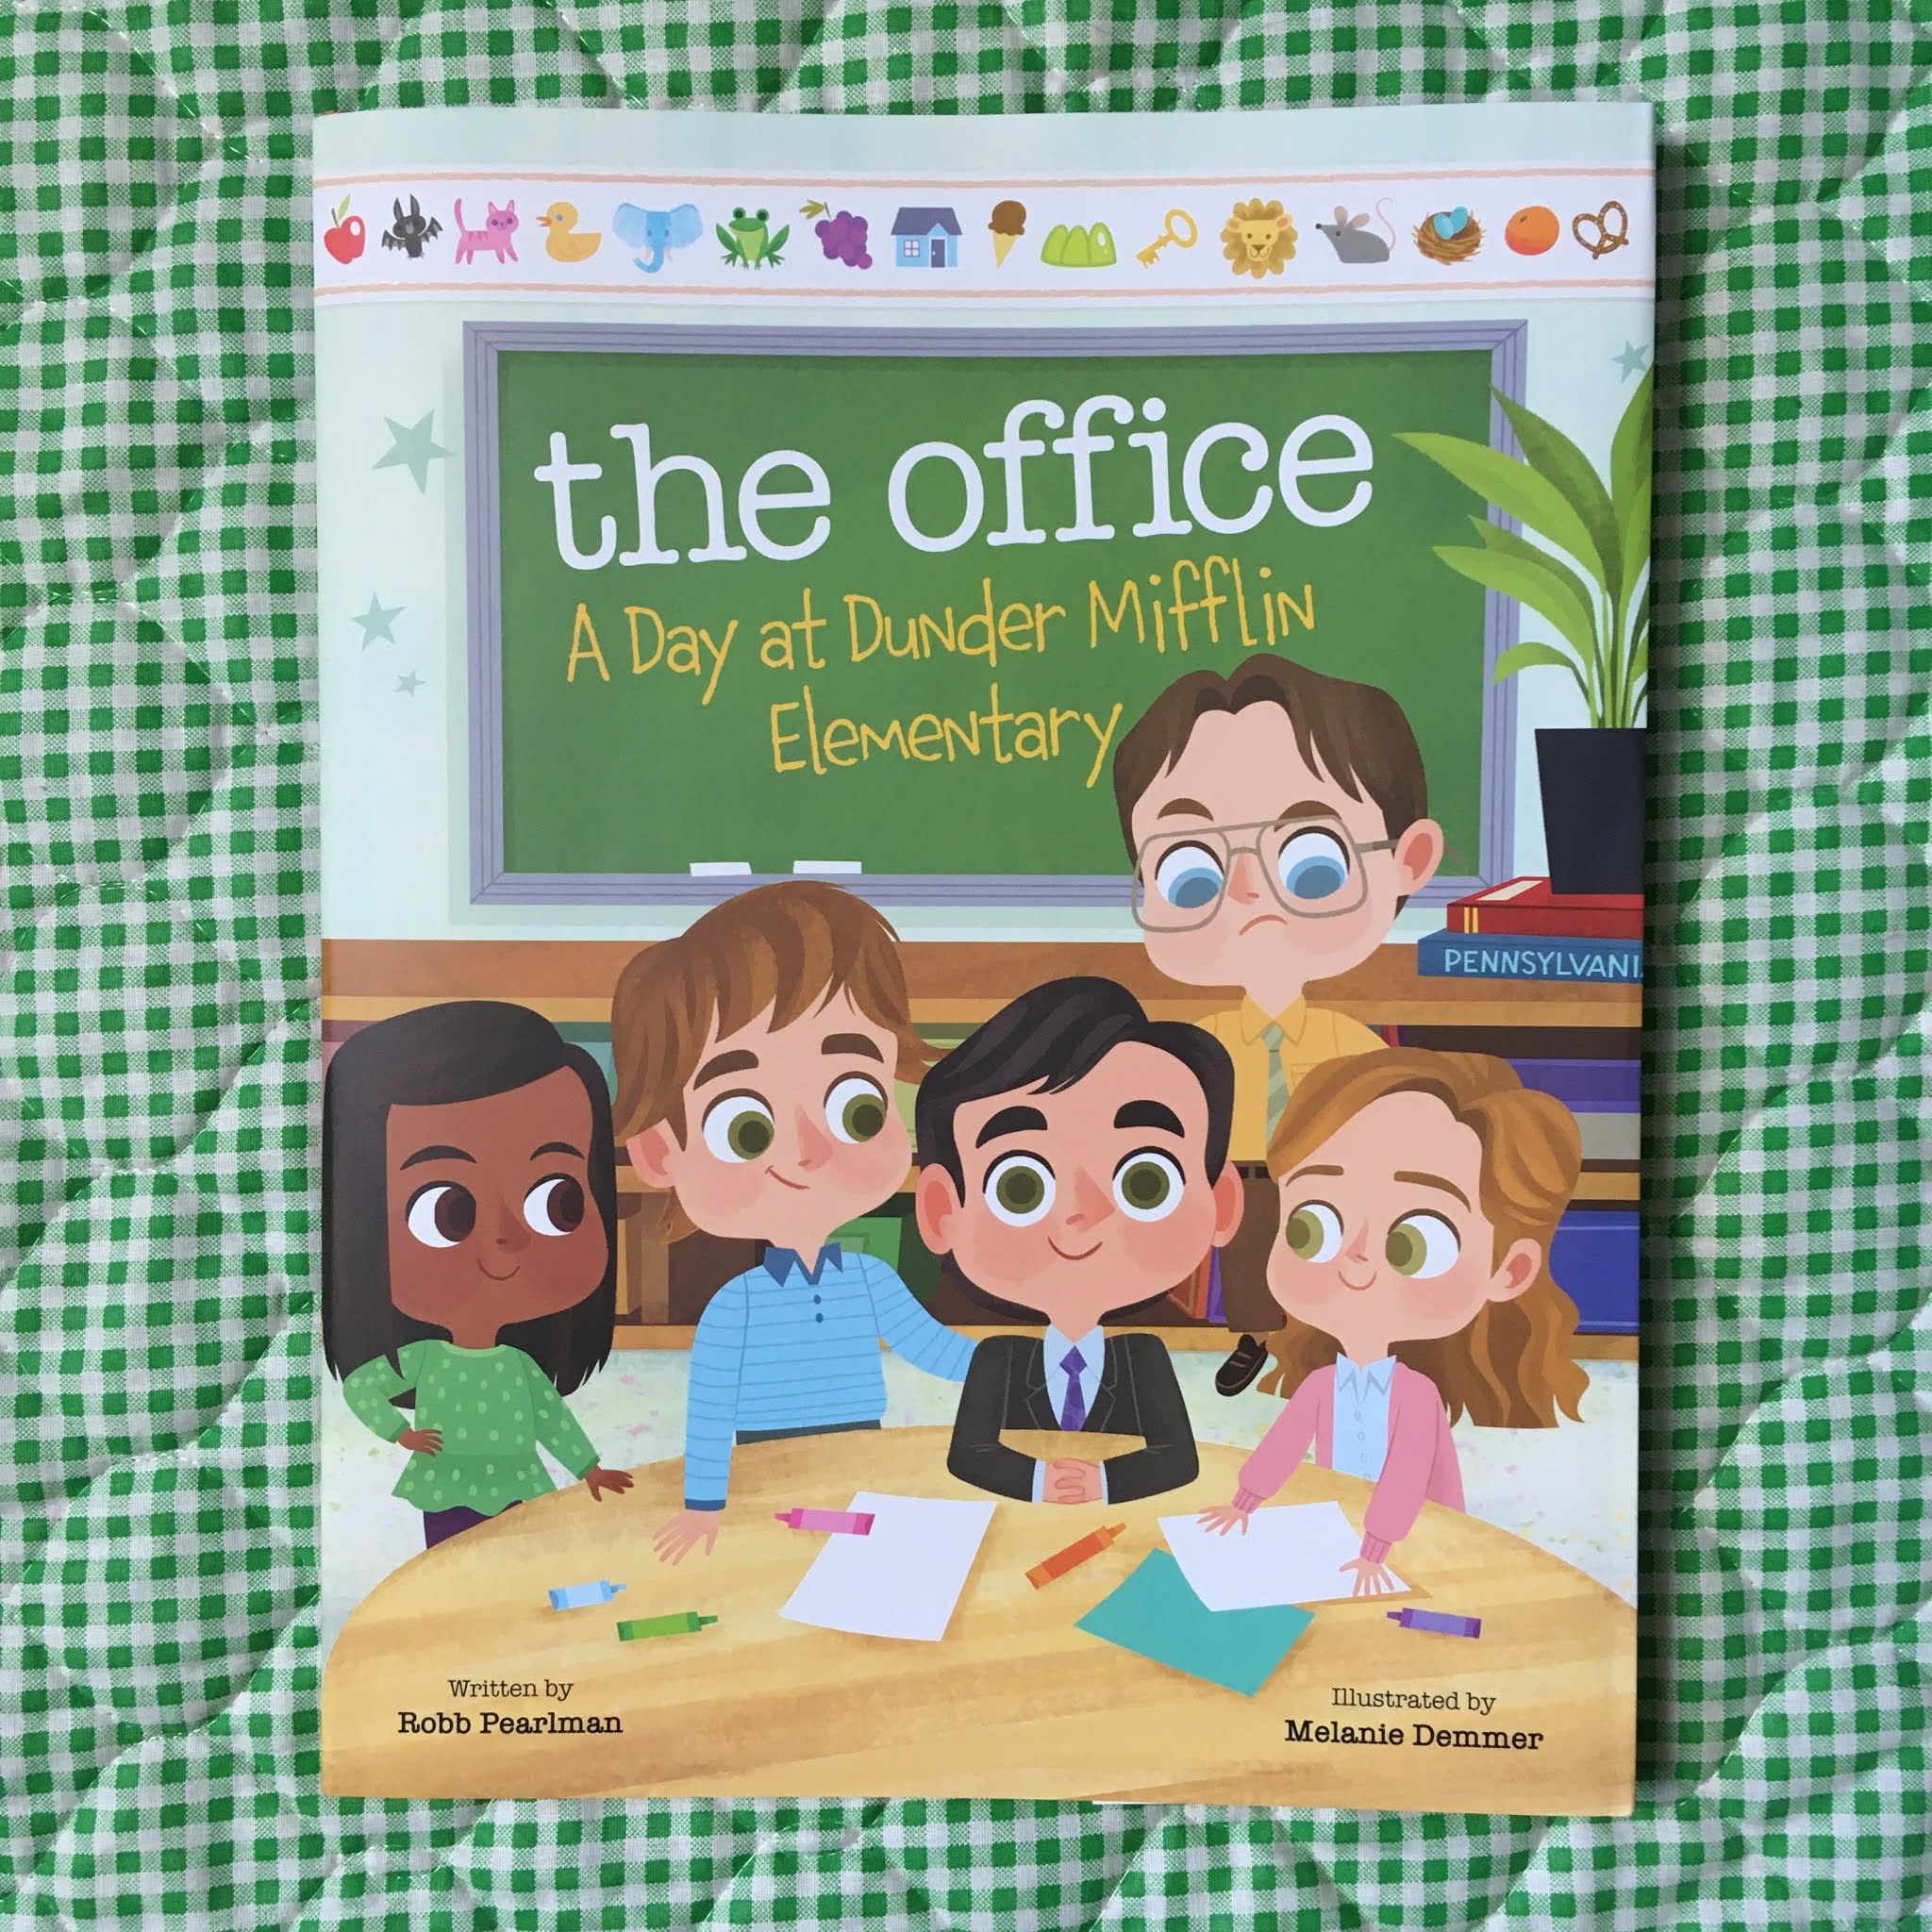 The Office: A Day at Dunder Mifflin Elementary - by Robb Pearlman  (Hardcover)